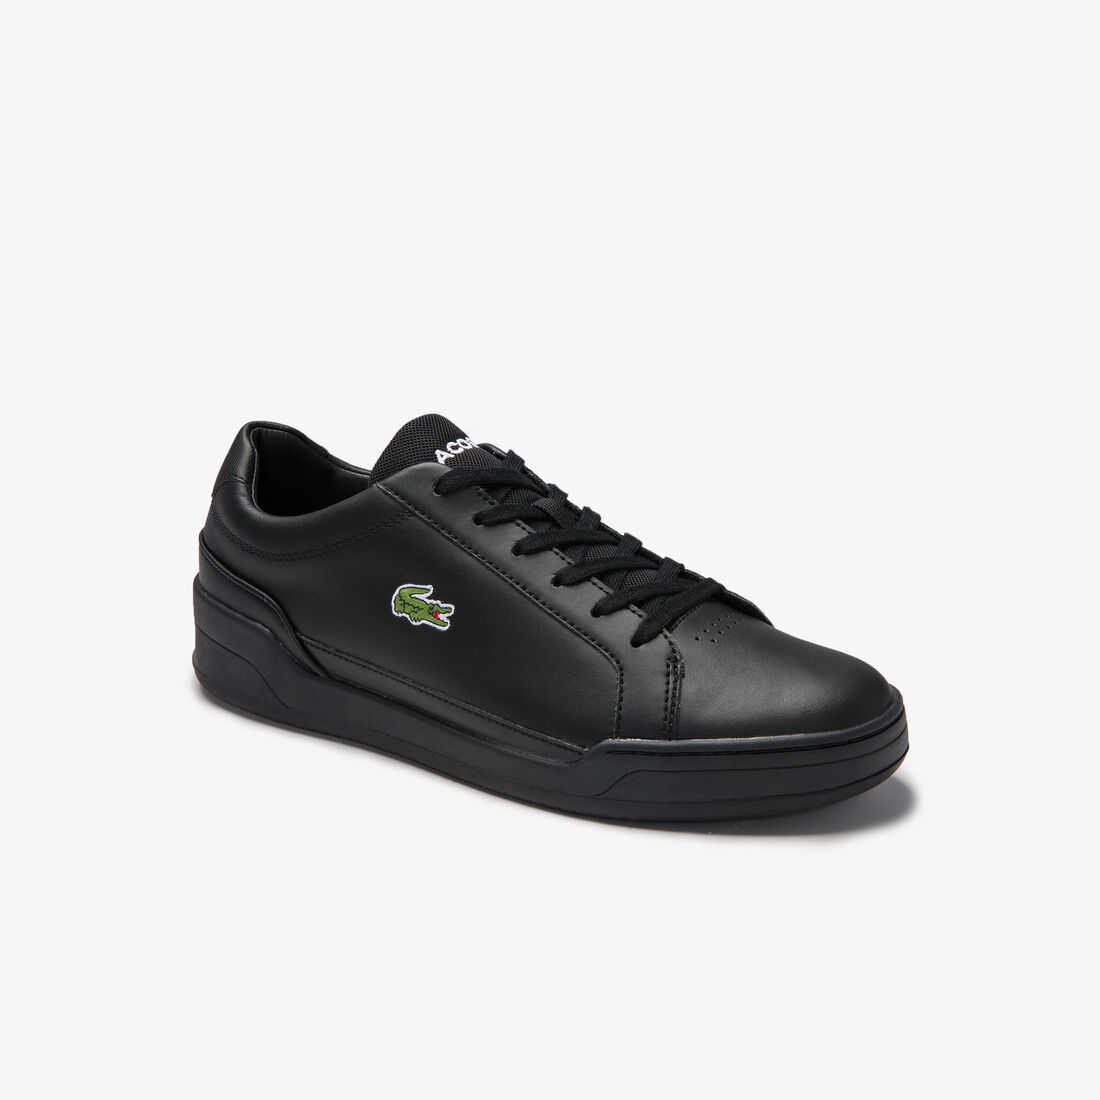 Men's Challenge Textured Leather Trainers